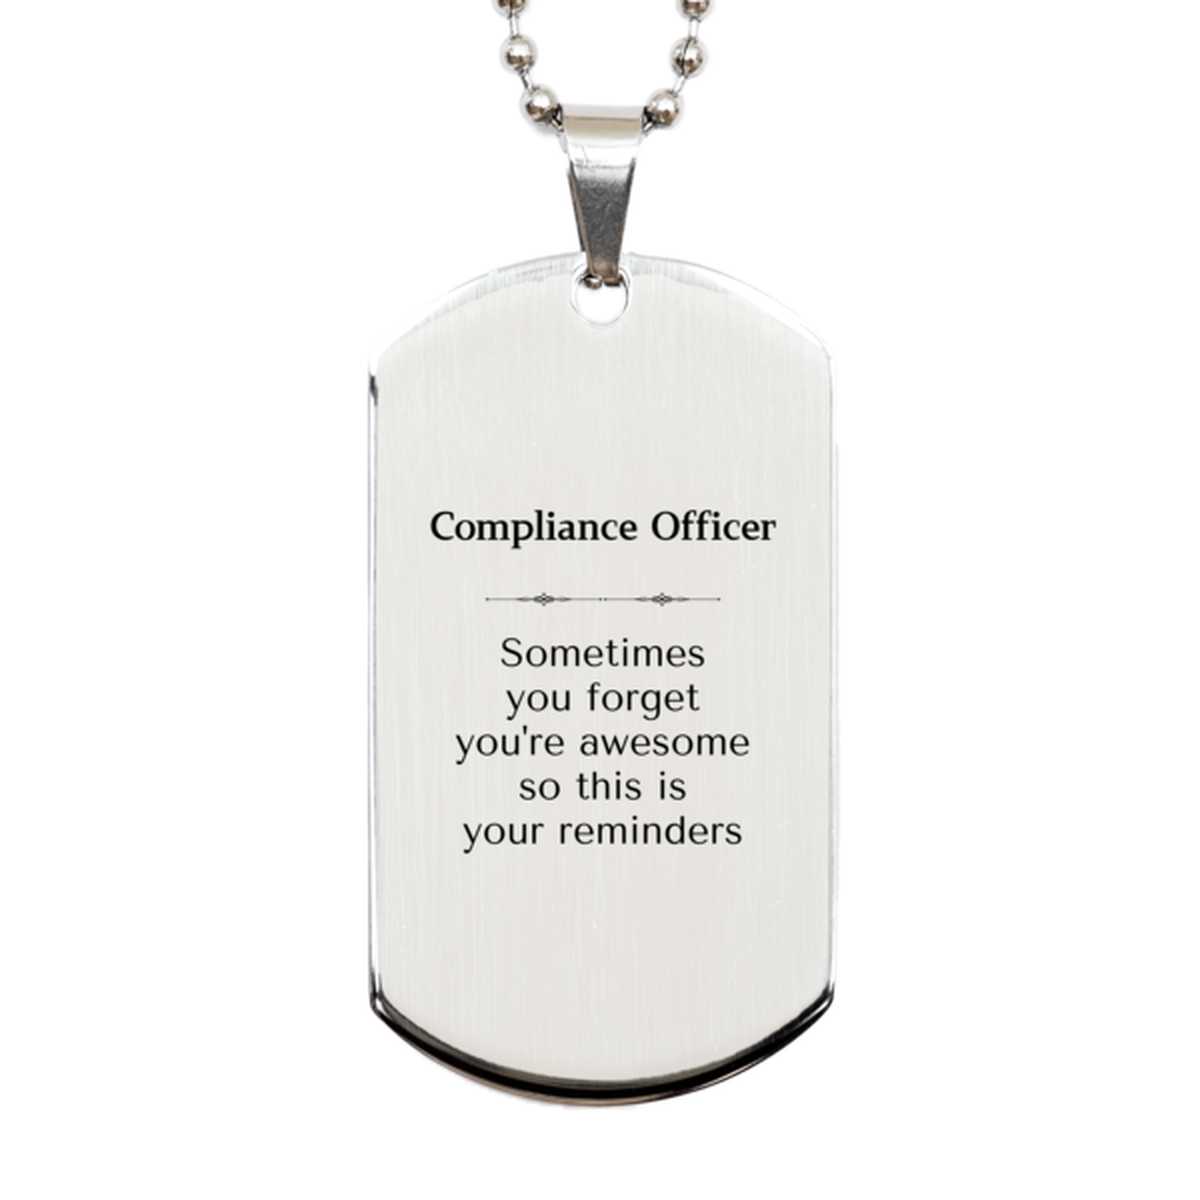 Sentimental Compliance Officer Silver Dog Tag, Compliance Officer Sometimes you forget you're awesome so this is your reminders, Graduation Christmas Birthday Gifts for Compliance Officer, Men, Women, Coworkers